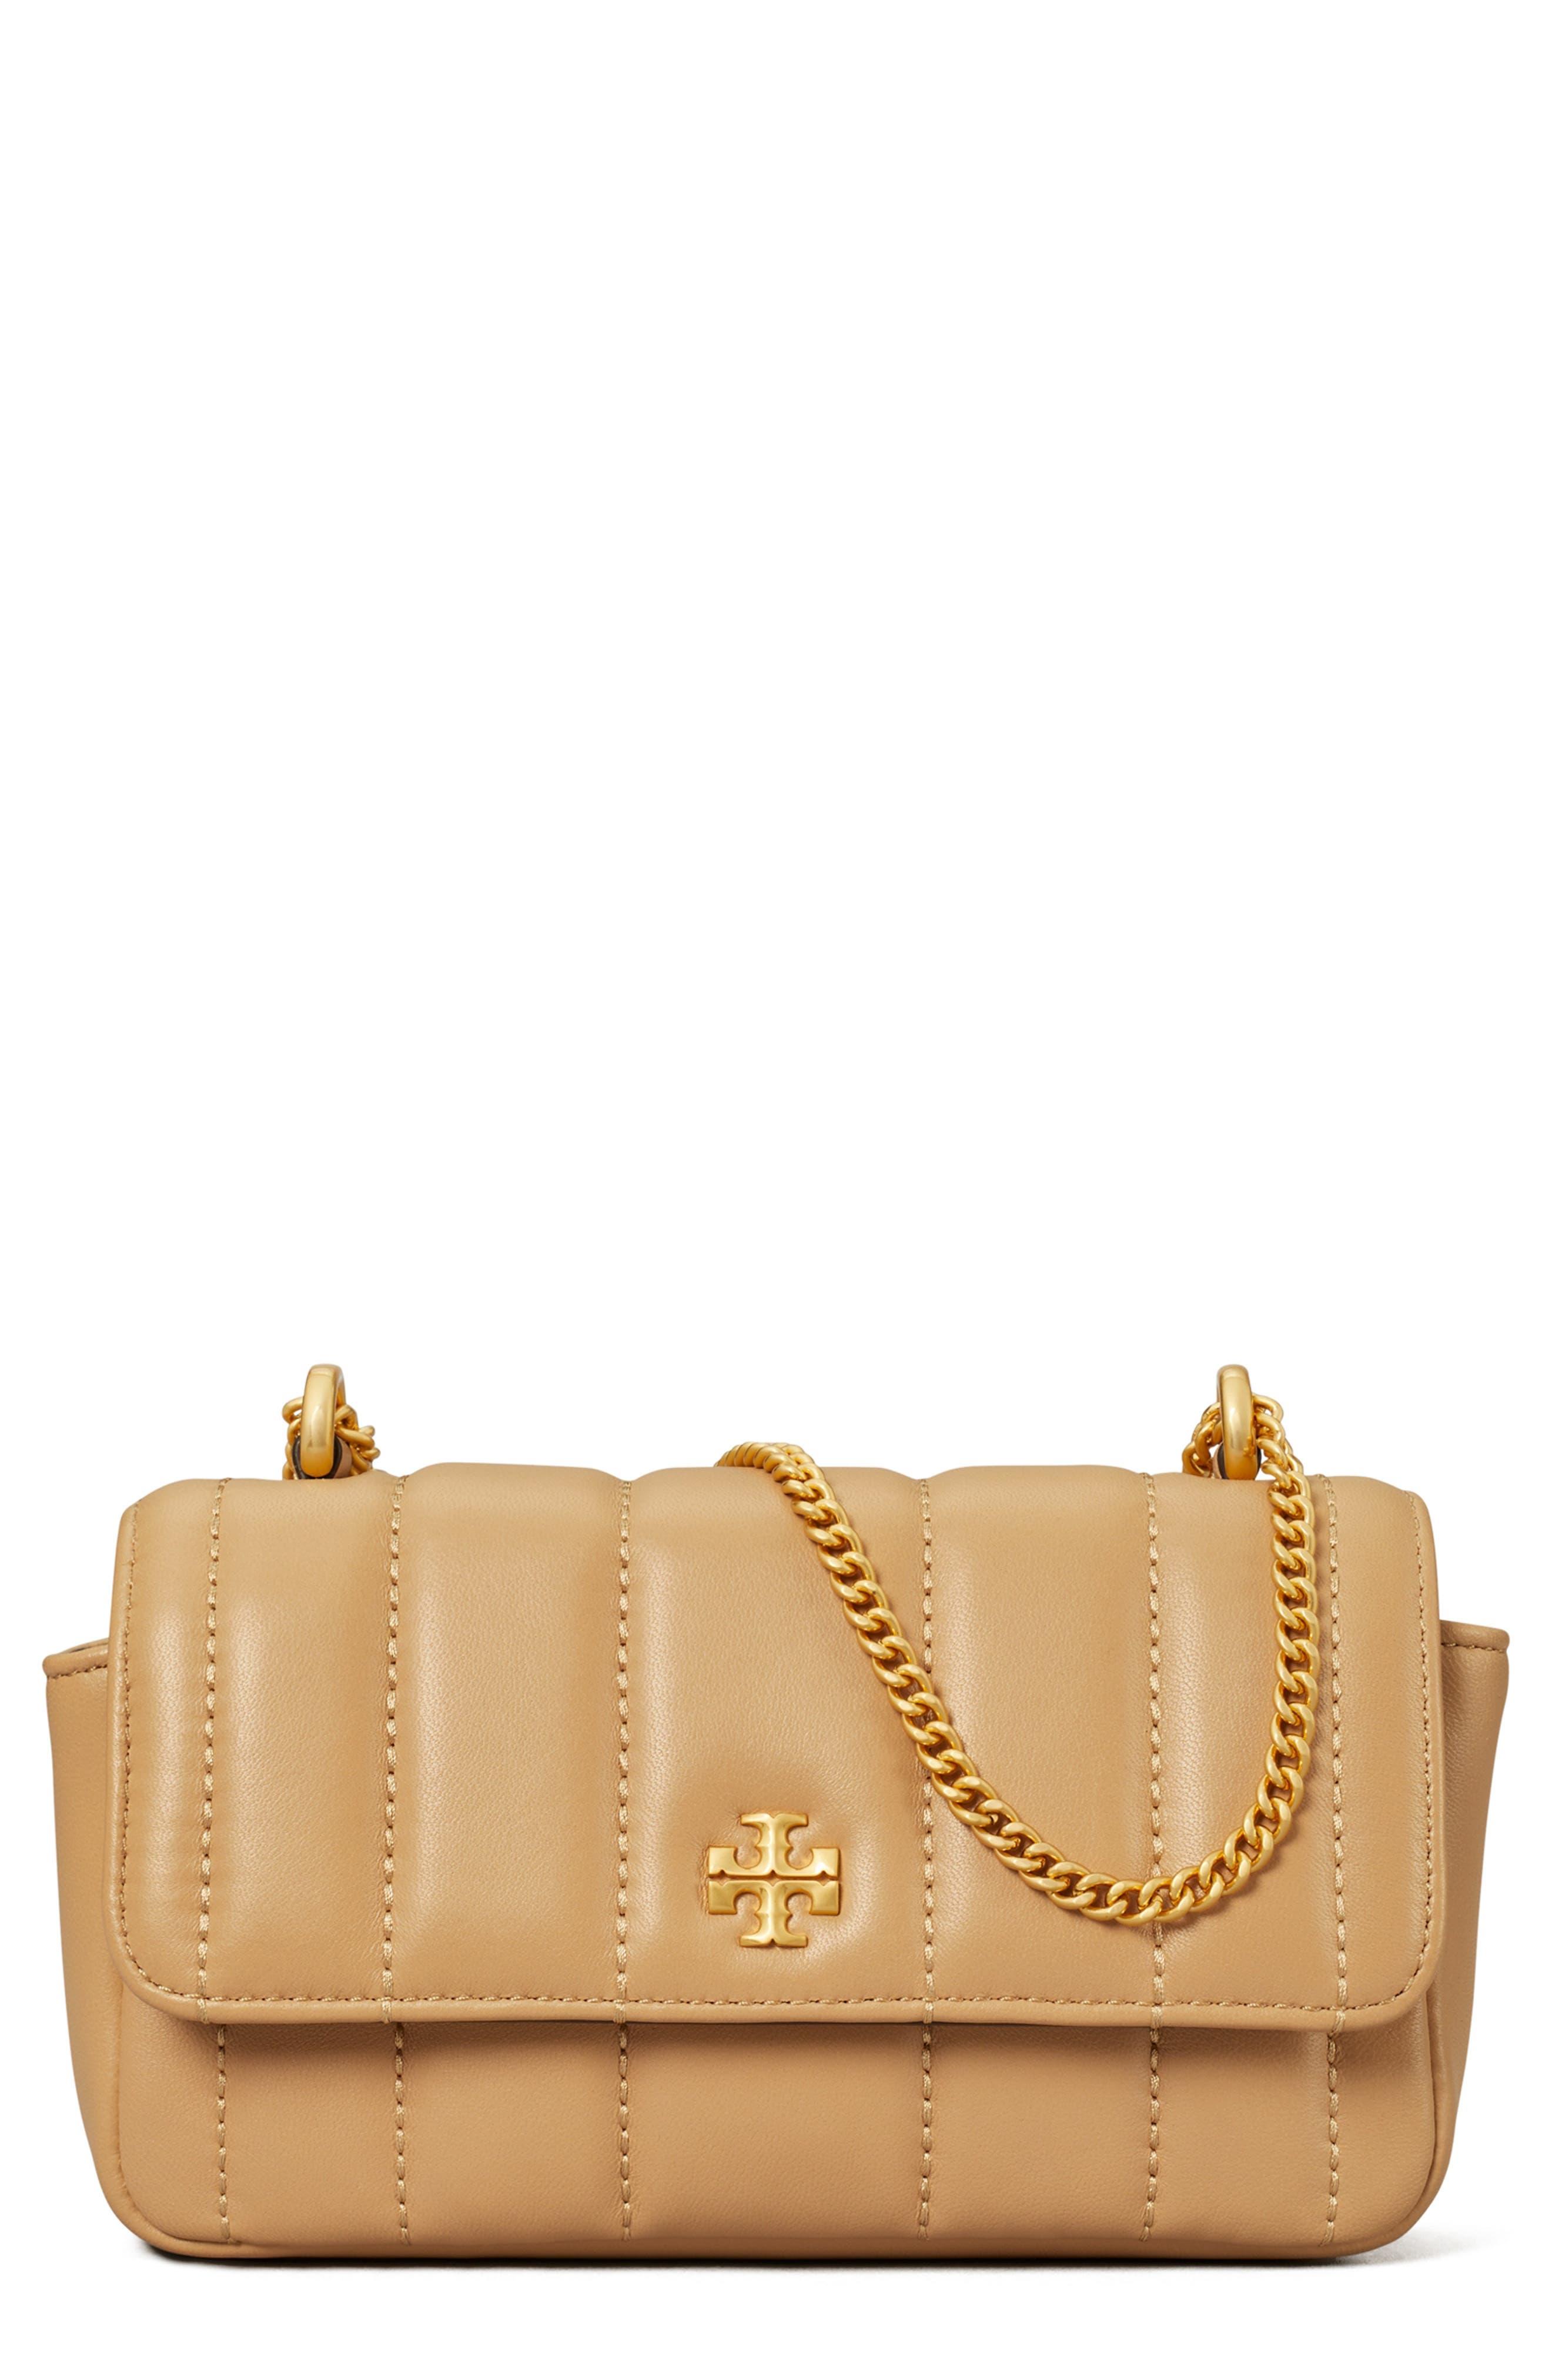 Tory Burch Mini Kira Flap Convertible Quilted Leather Shoulder Bag in ...